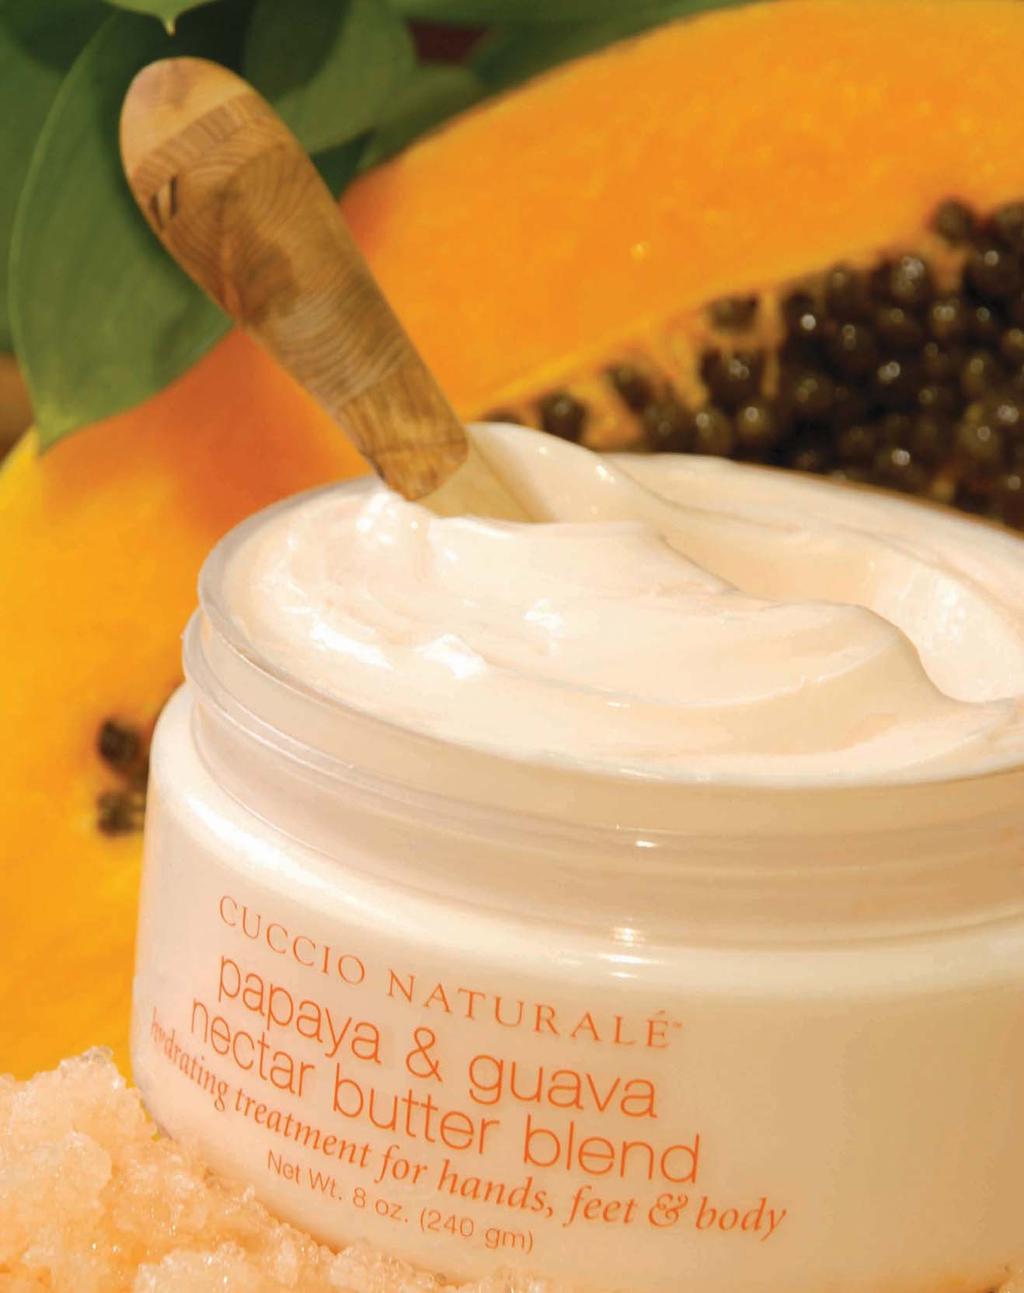 Papaya and Guava Regenerating & Healing Butter Blend 10x the Moisturizing Power of Lotions A non-oily intense hydration treatment for silky smooth skin.